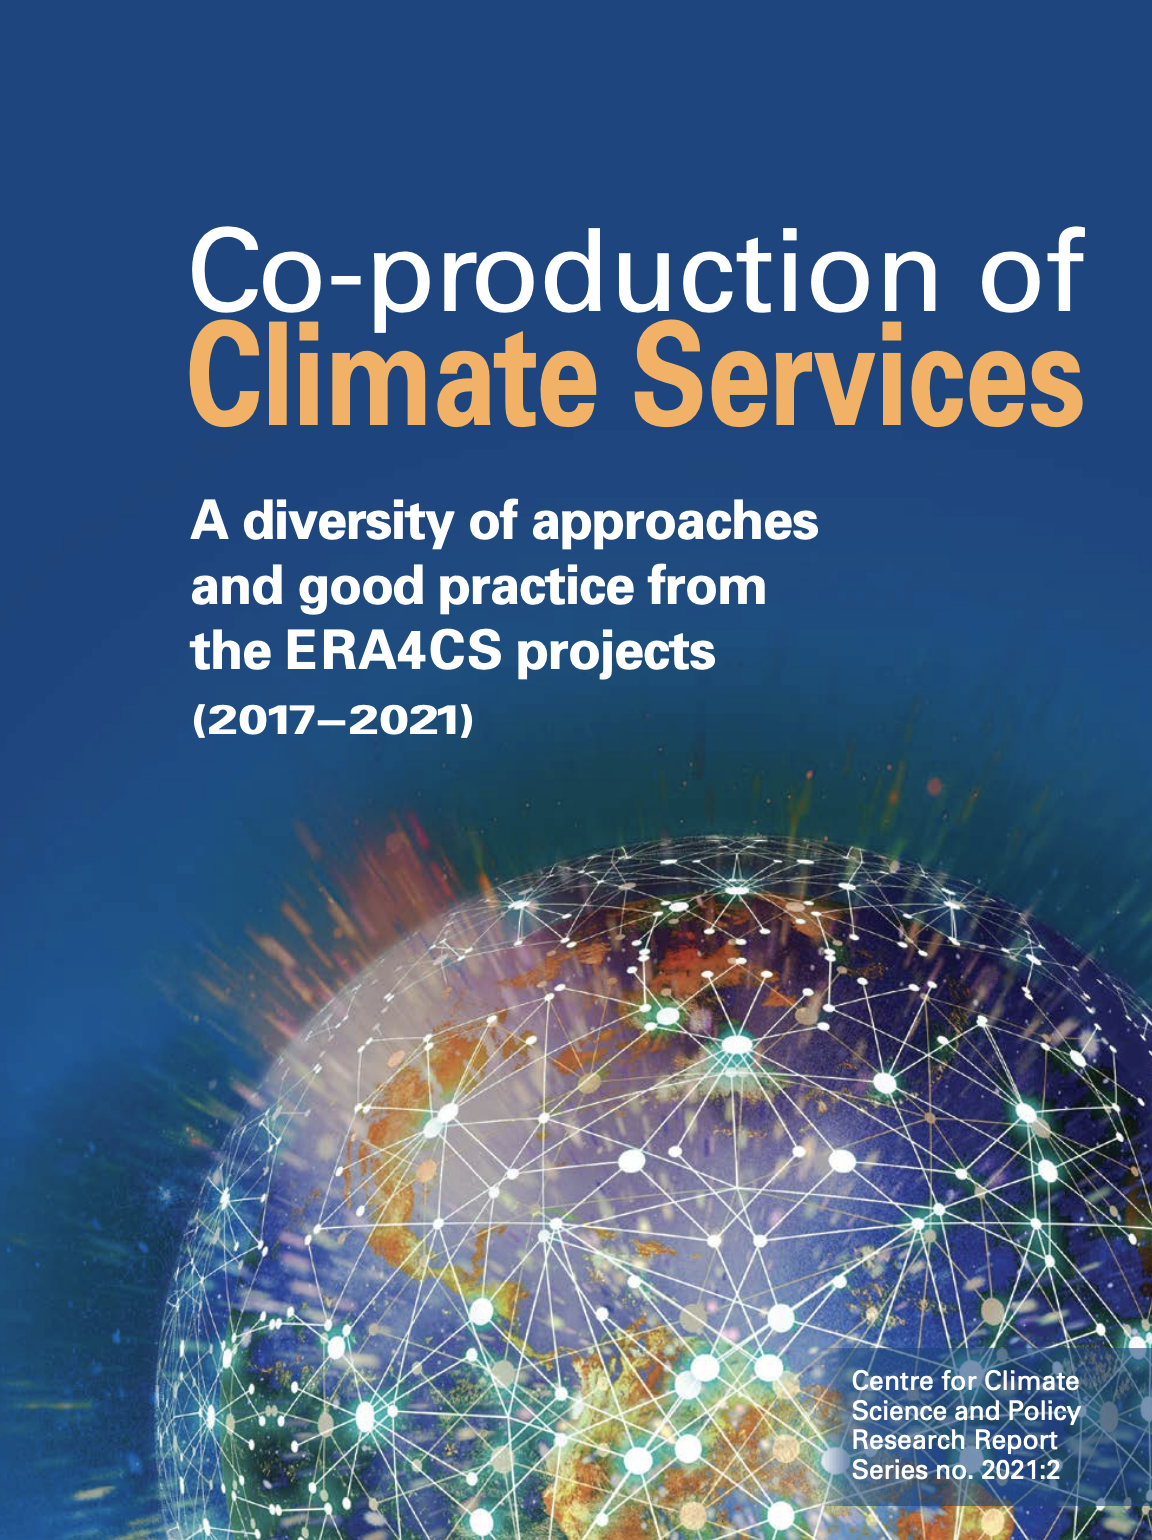 Front cover of report, with title and image of interconnected globe